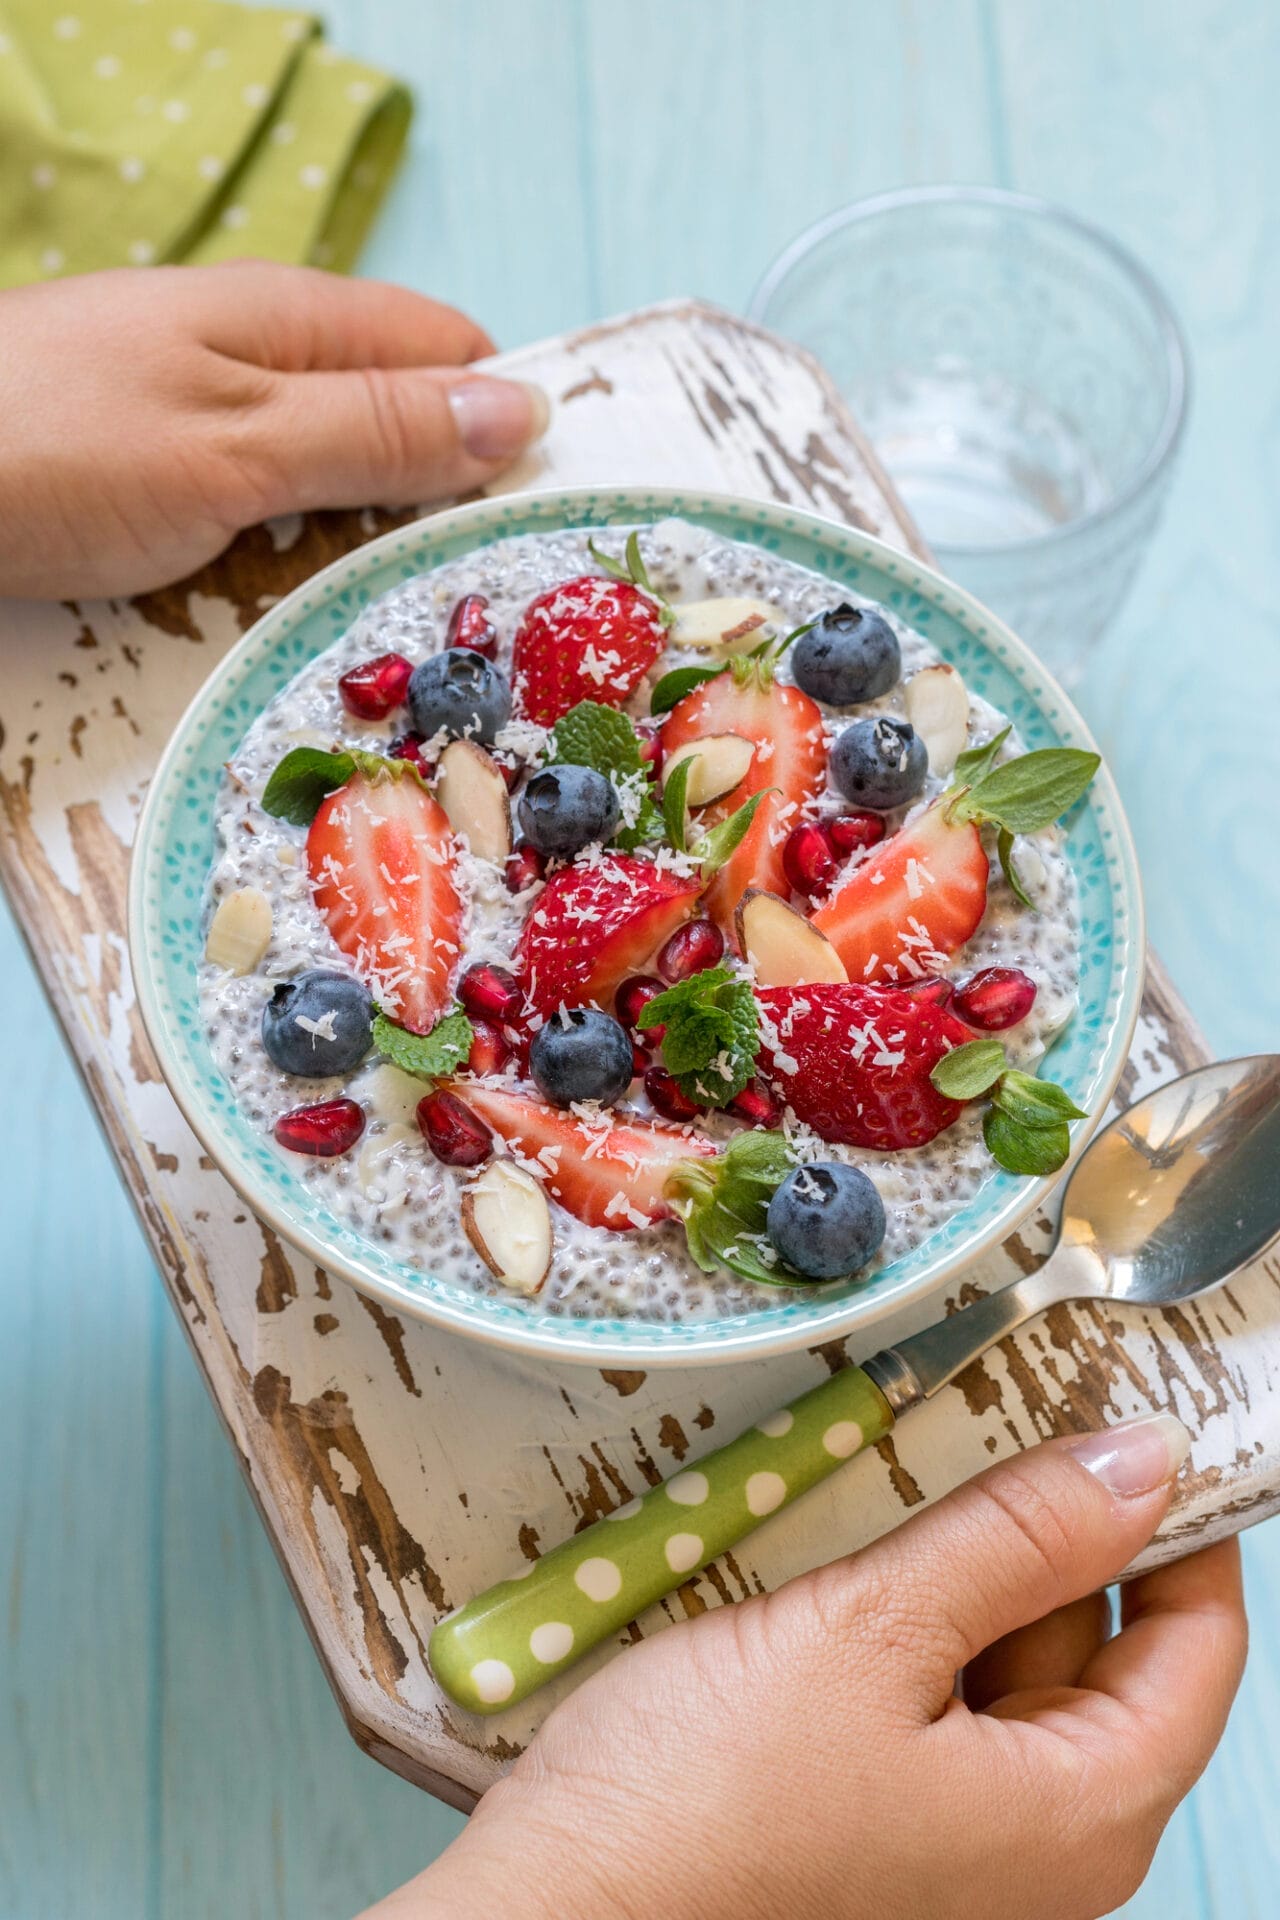 Chia pudding with fresh berries and almonds.